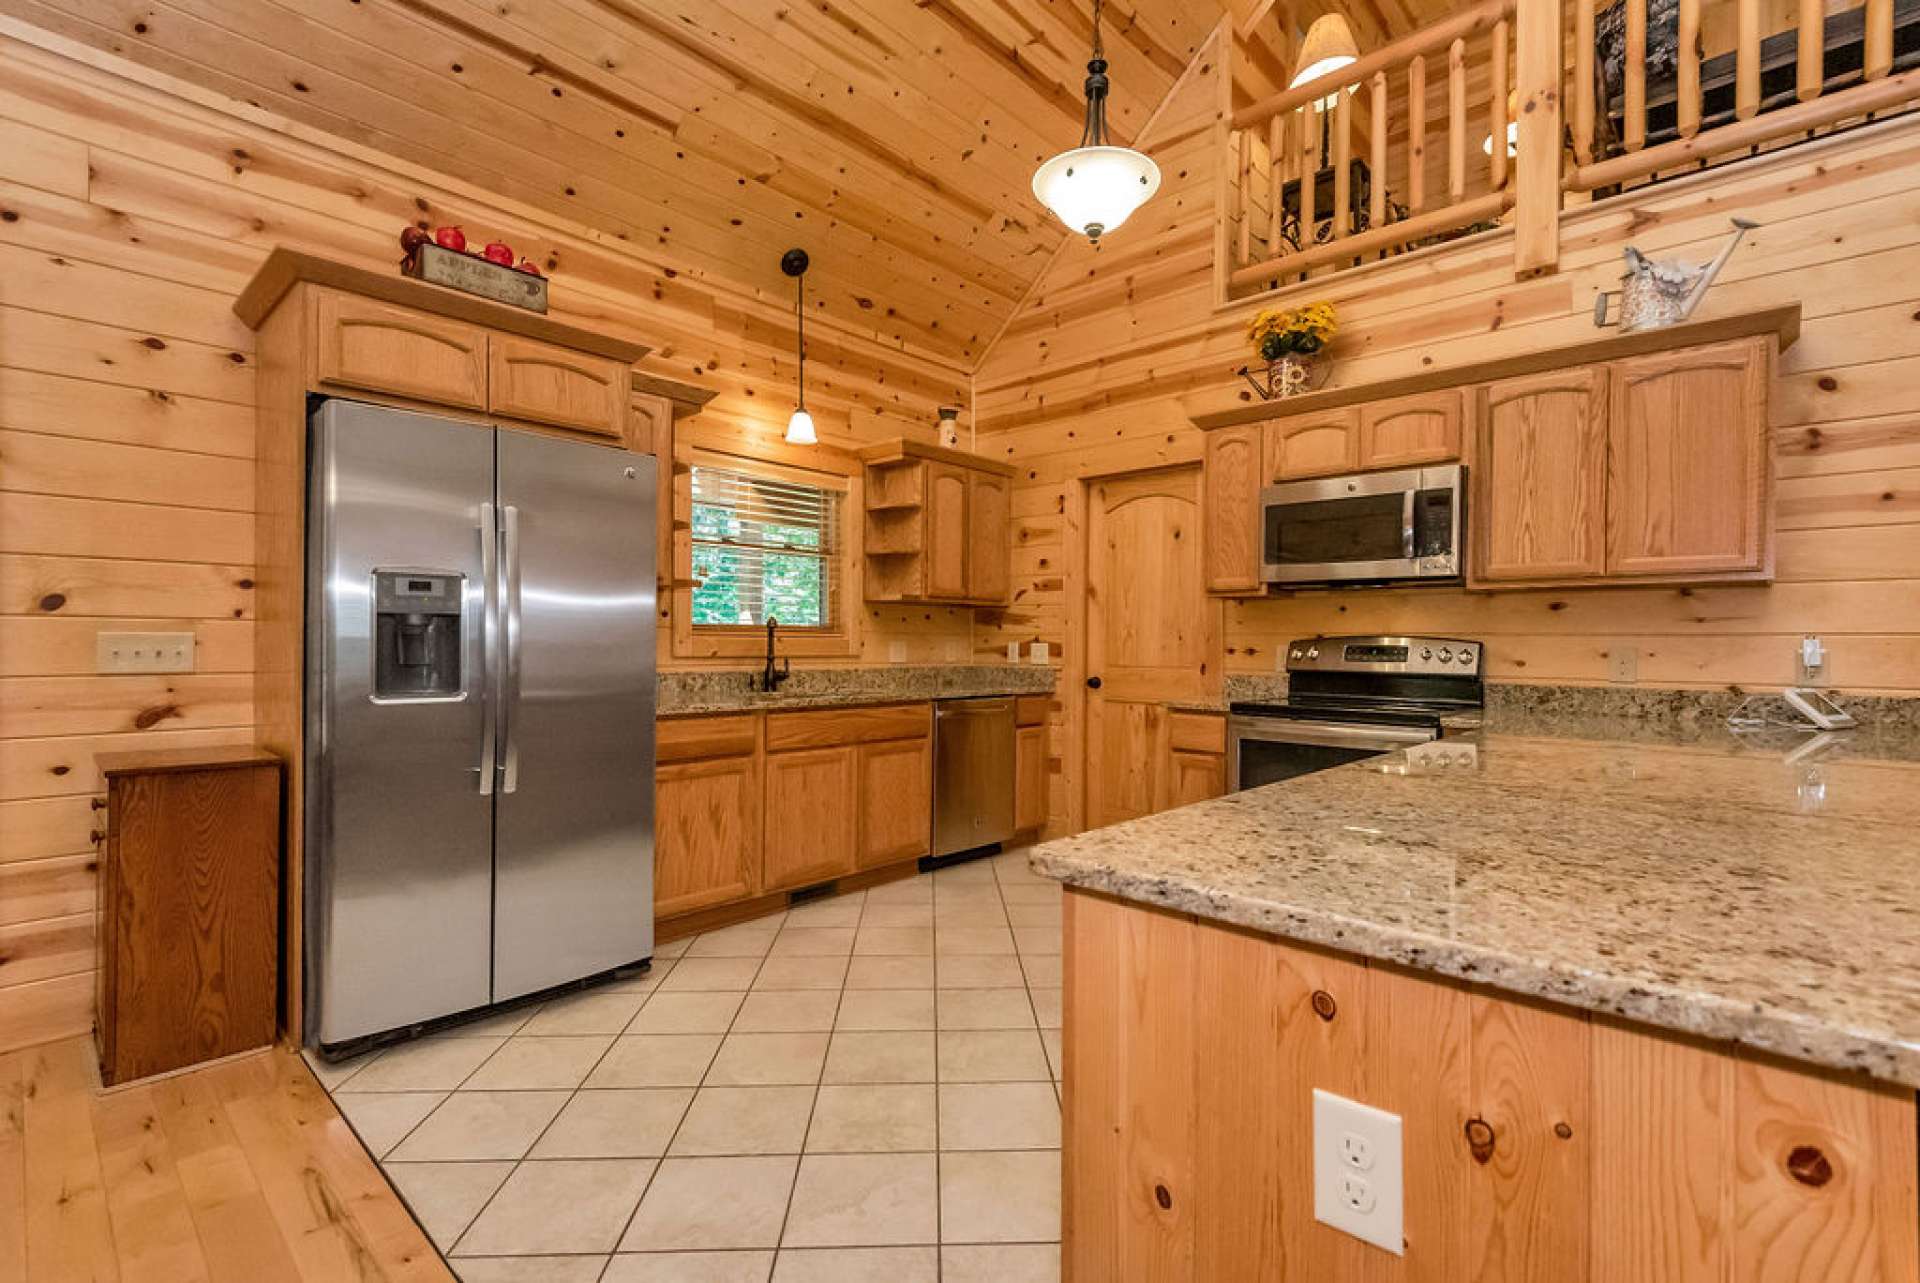 The kitchen features granite countertops, stainless appliances, and an oversized eating bar. You can have a workspace while your guests enjoy their favorite beverages and appetizers.